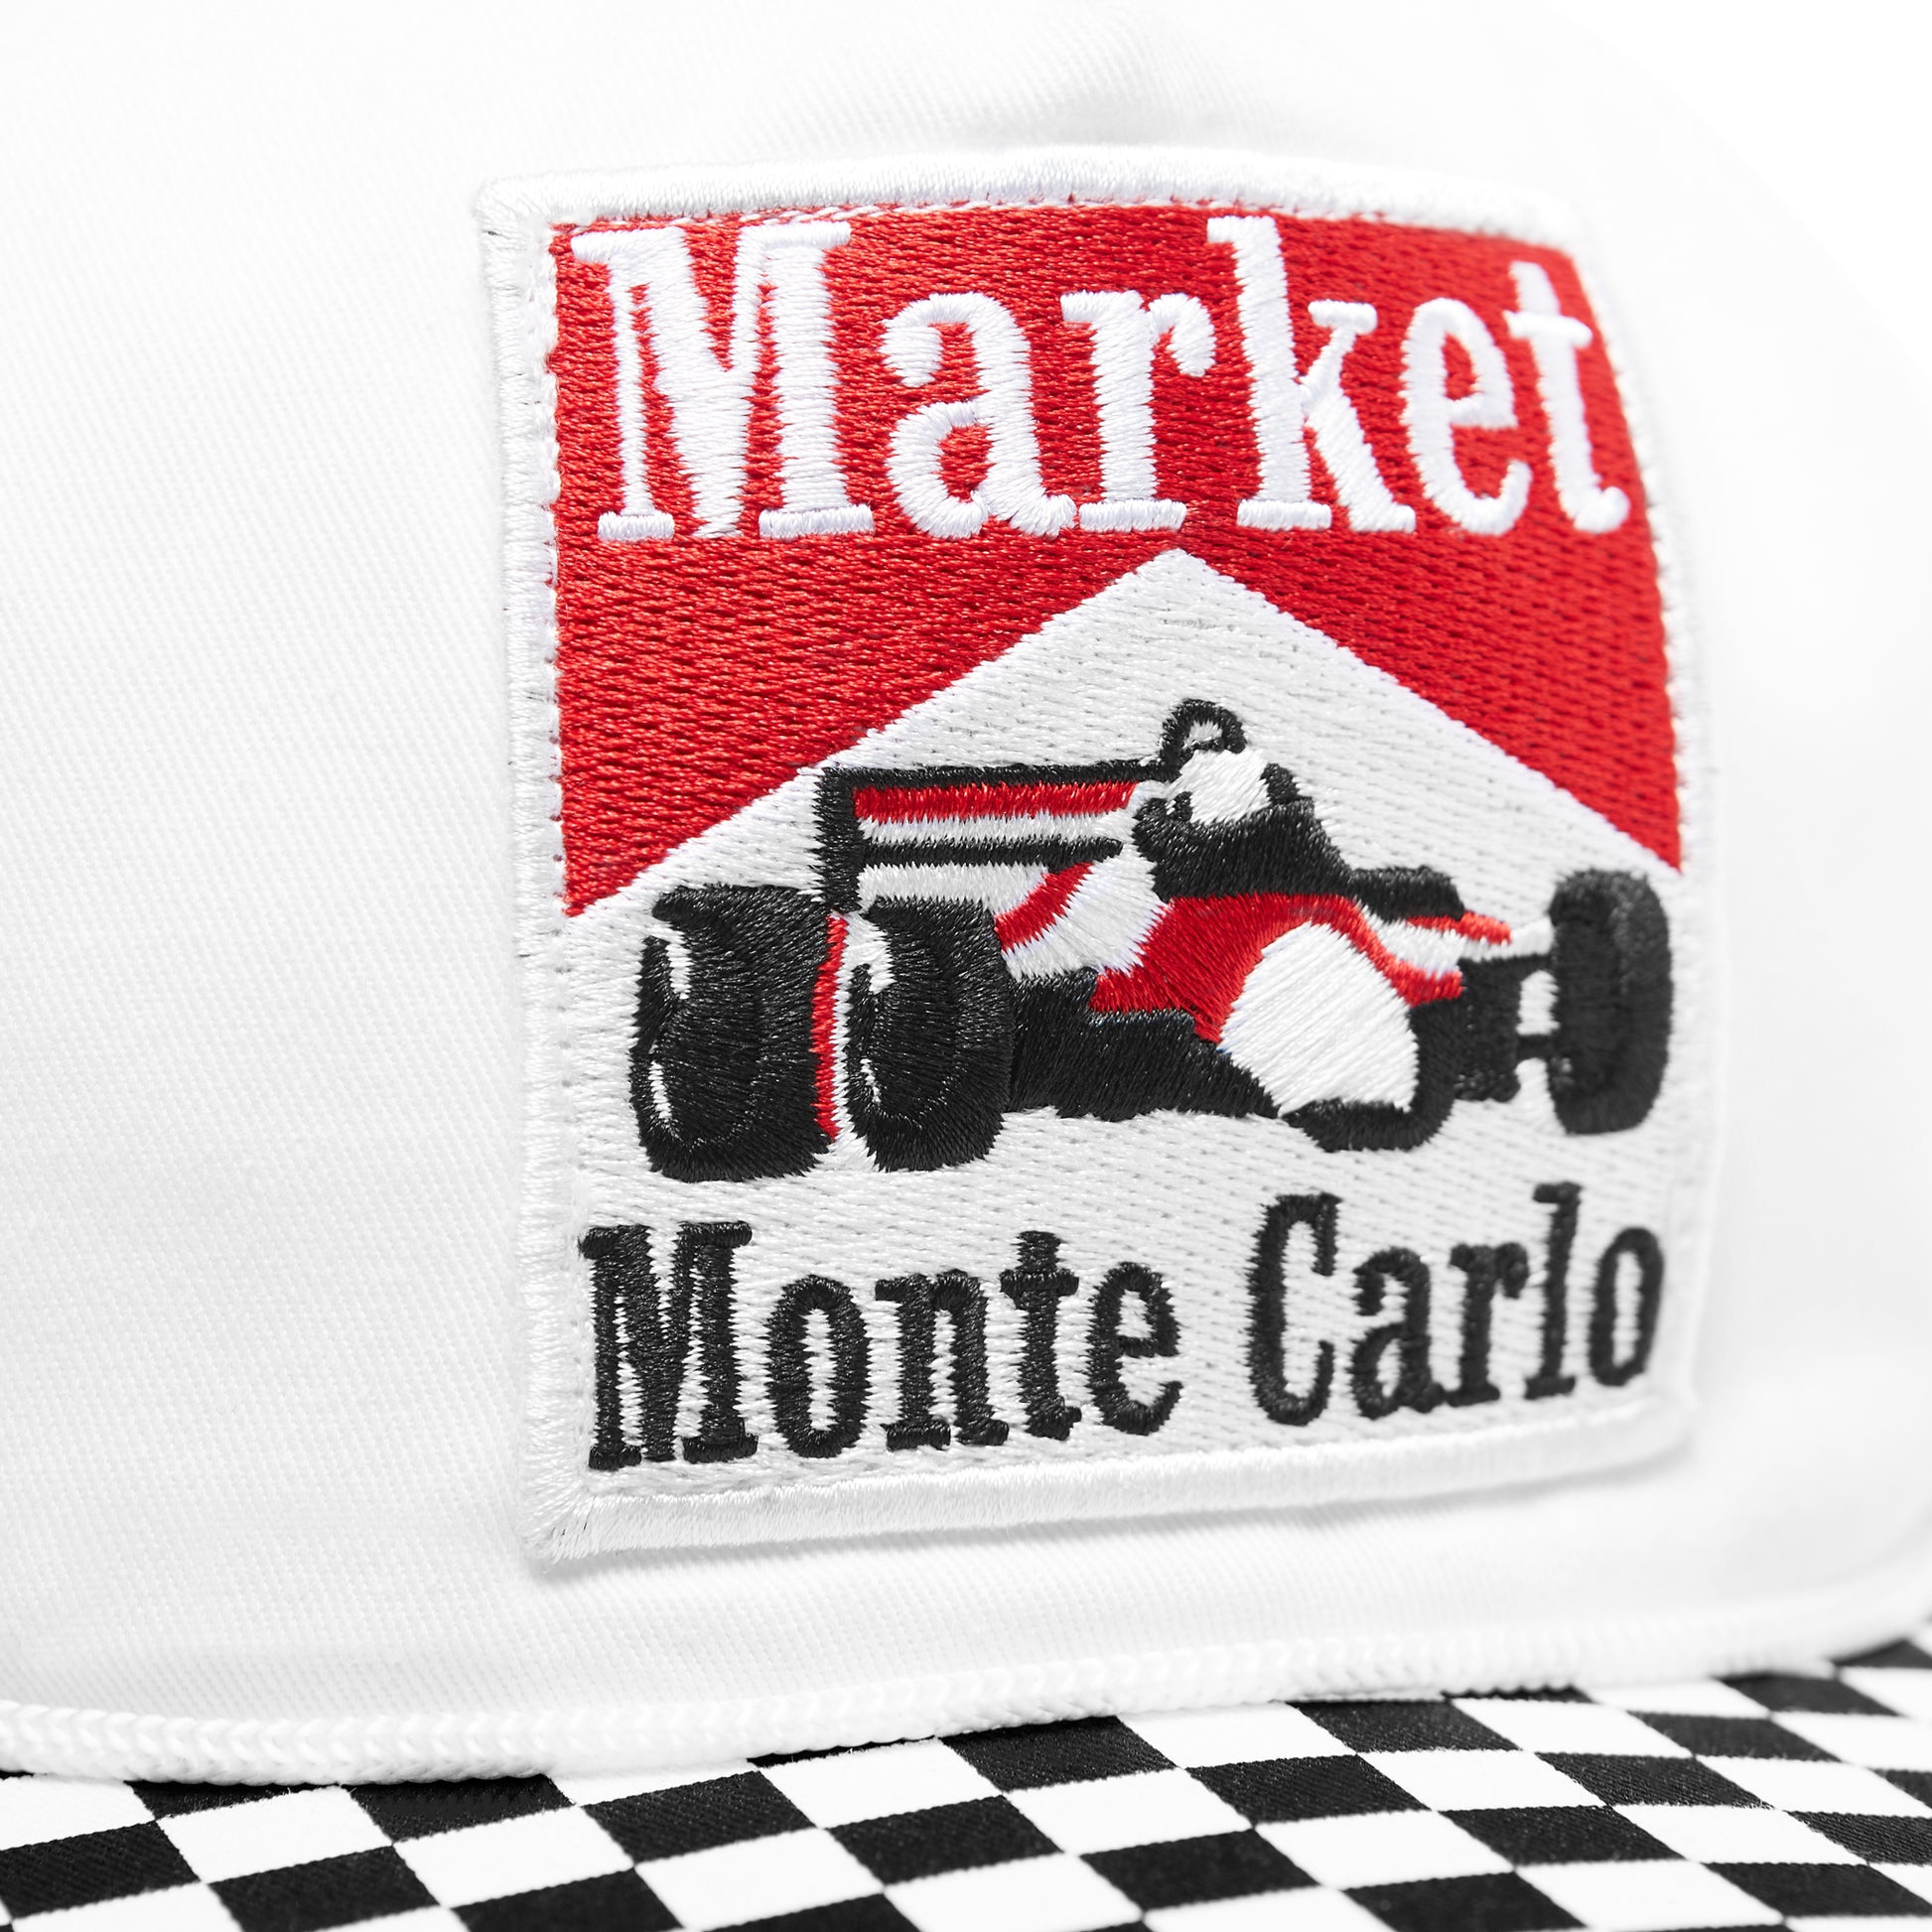 MARKET clothing brand MARKET RACING CHECKERED HAT. Find more graphic tees, hats, beanies, hoodies at MarketStudios.com. Formally Chinatown Market. 